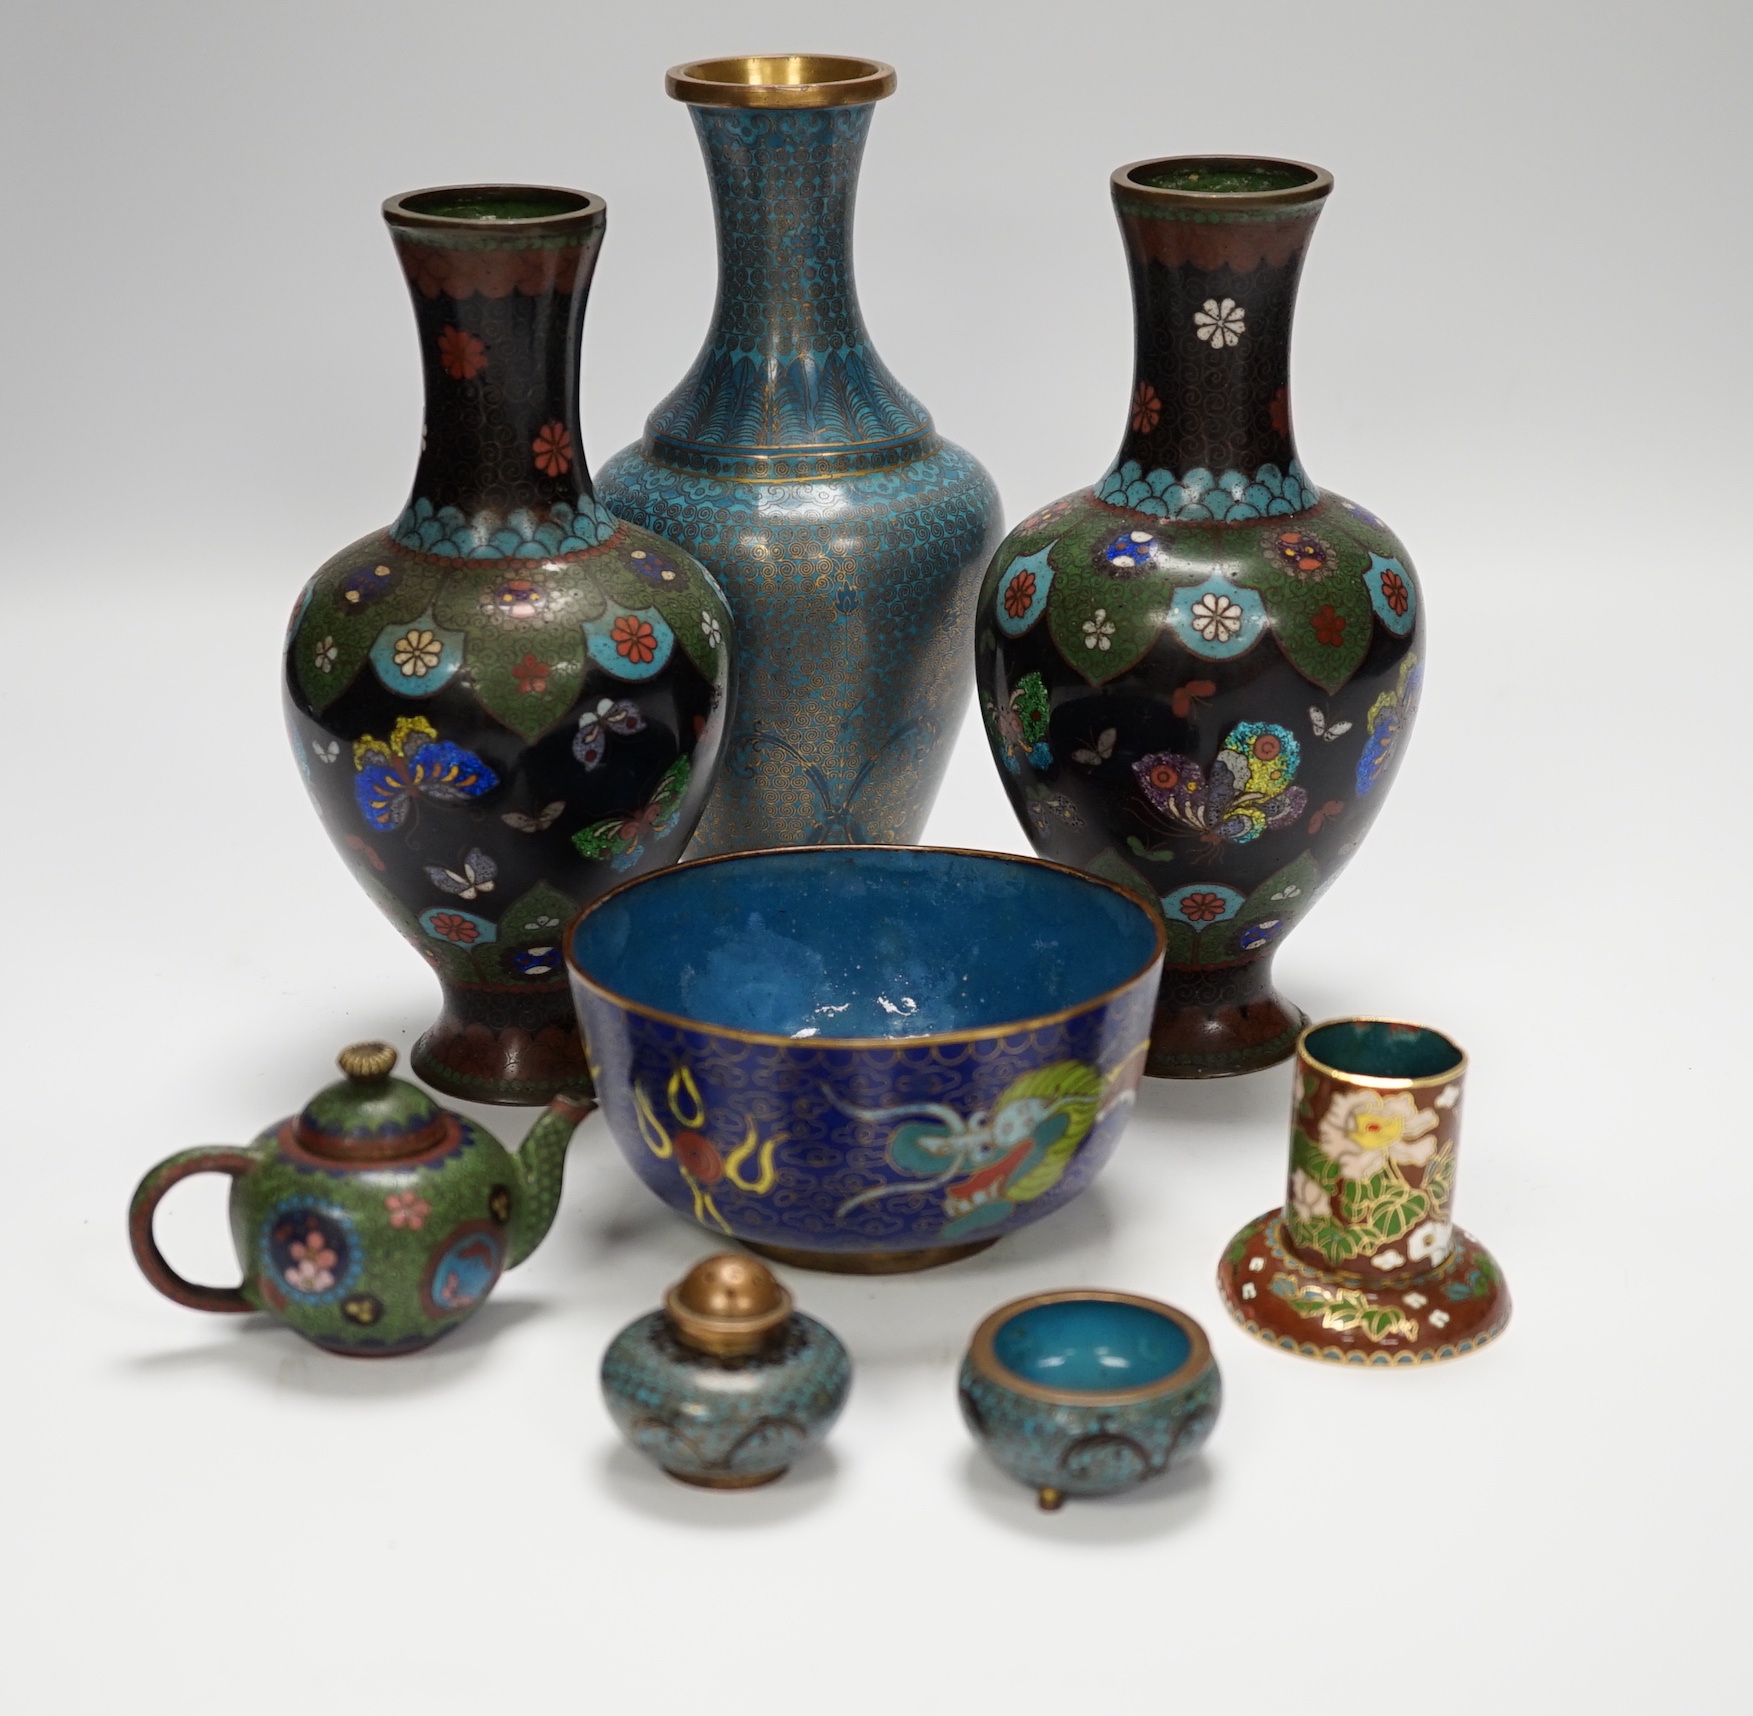 A collection of Chinese and Japanese cloisonné enamel pieces, including five vases, a ginger jar and